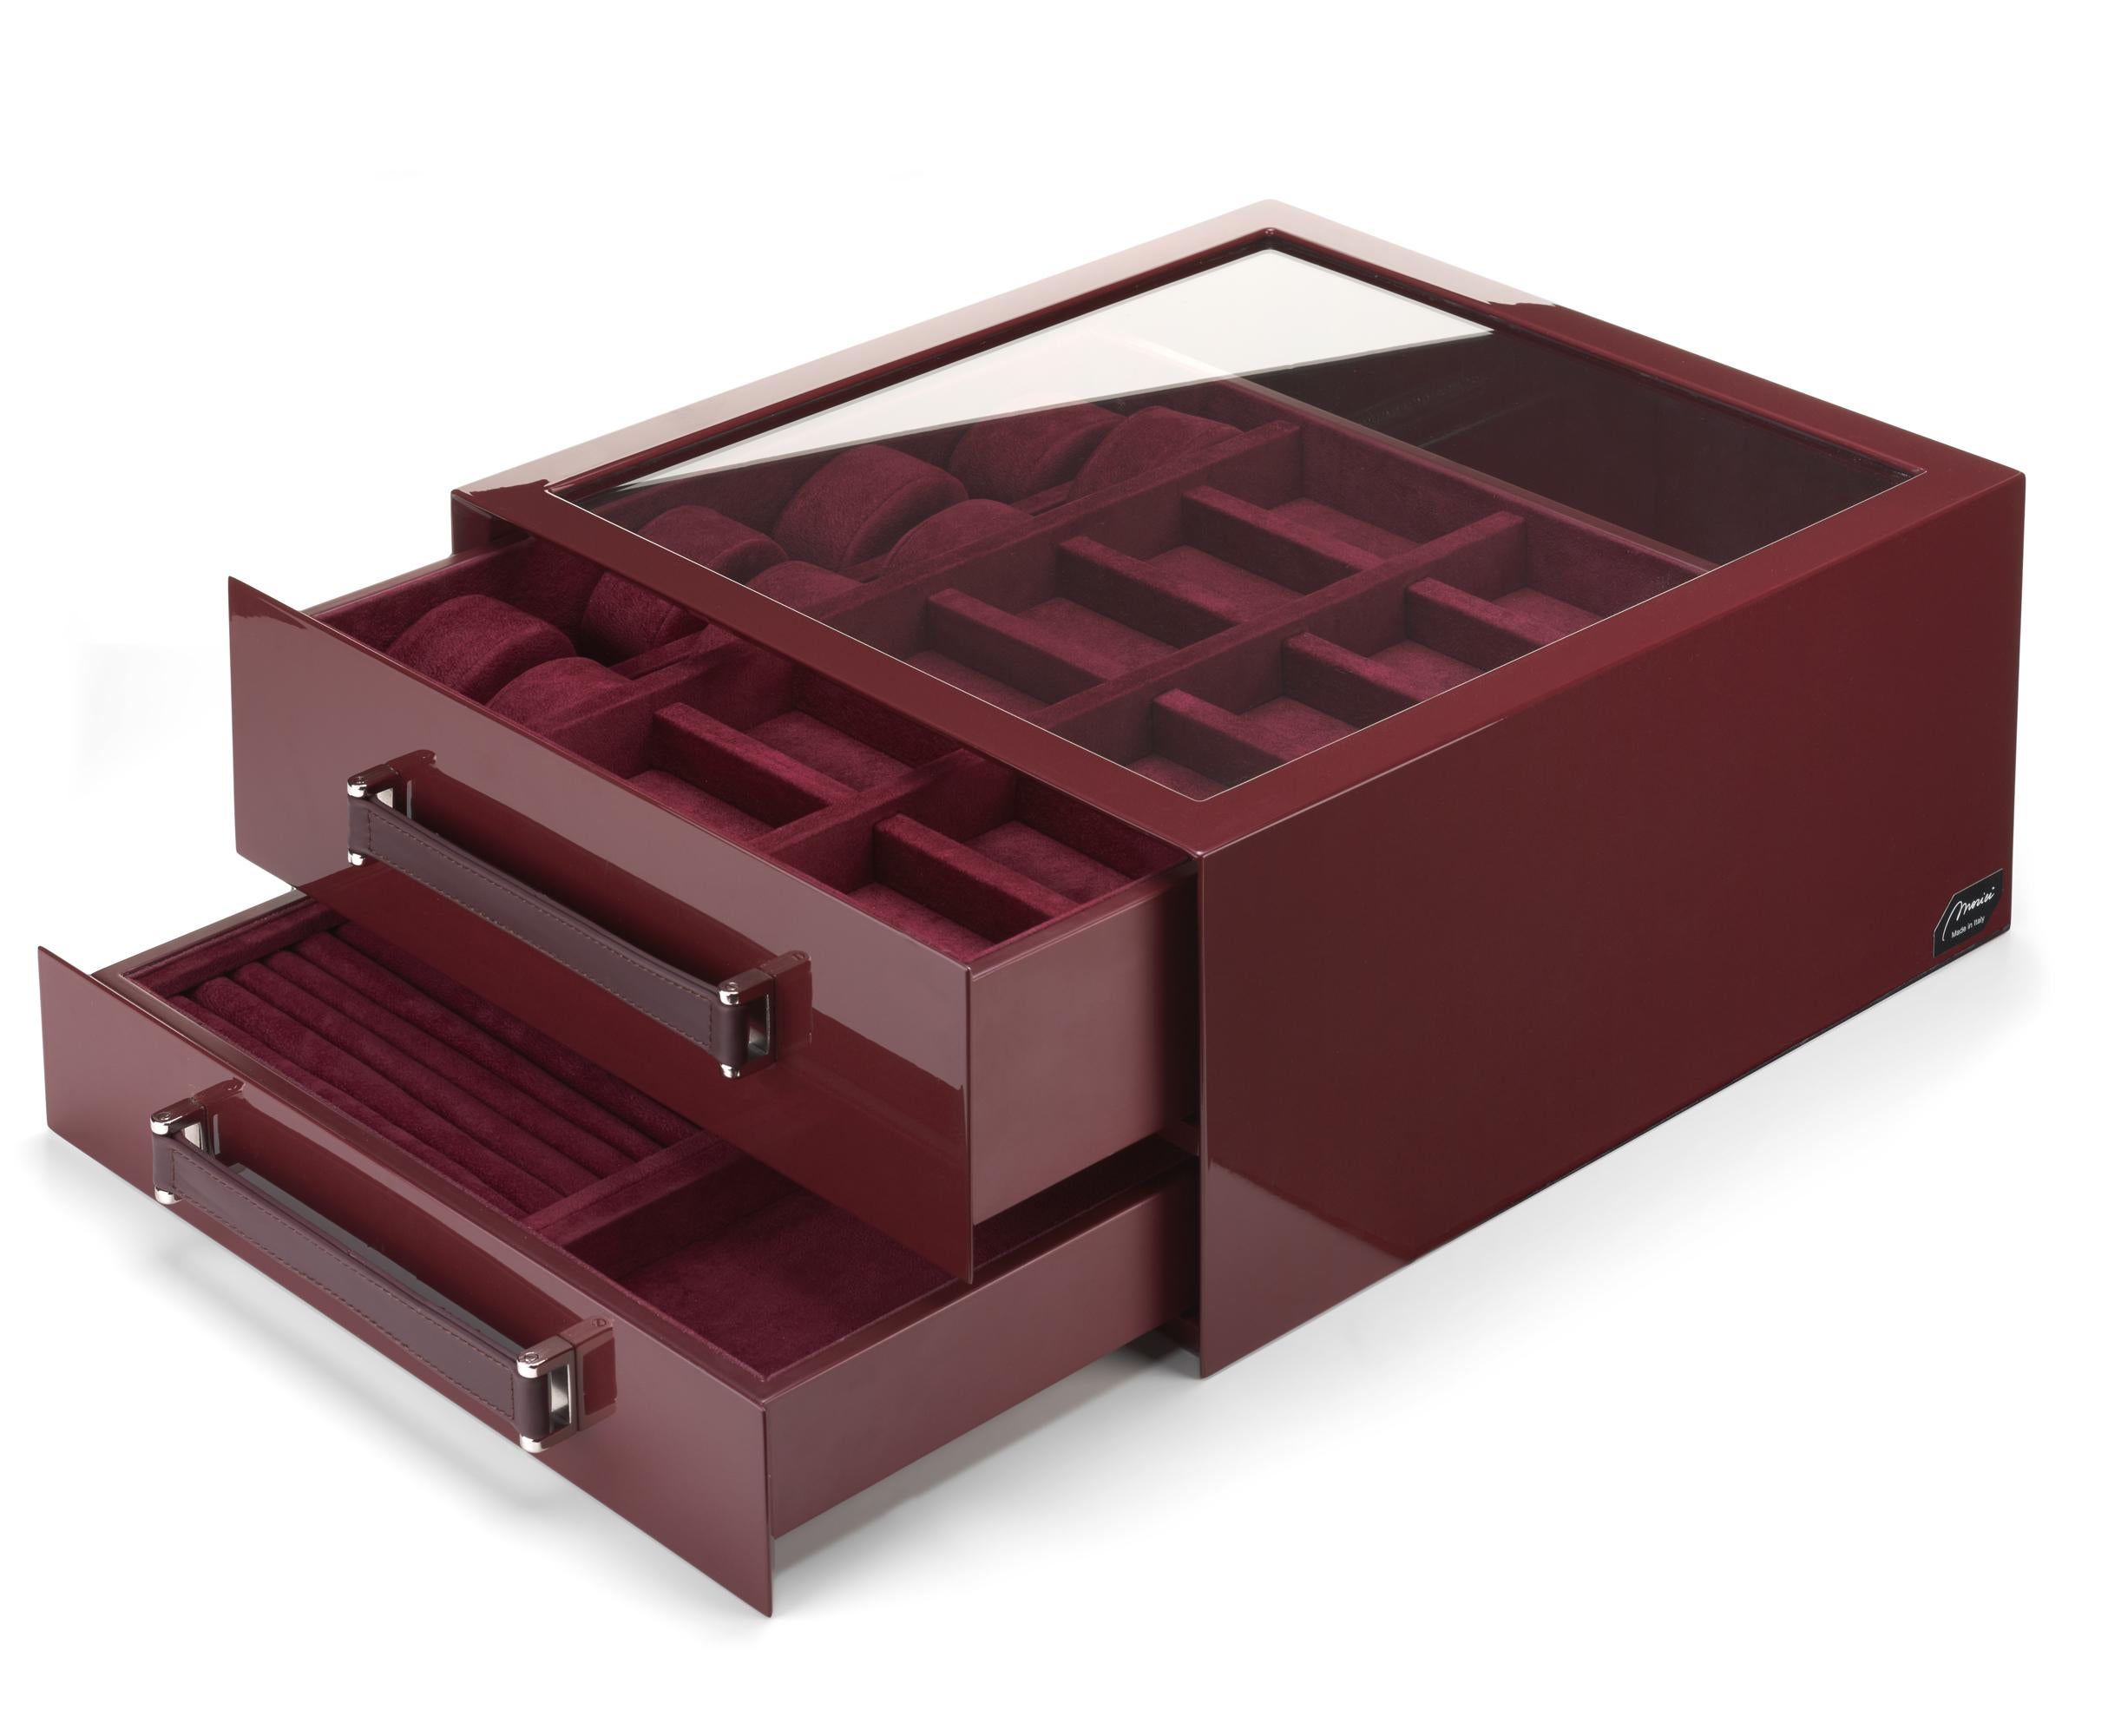 A clean and essential design of sophisticated contemporary flair, this jewelry box is distinguished by a bordeaux color obtained with a brushed and polished polyester finish. Handcrafted of wood, it is enriched with silver-finished metal details and